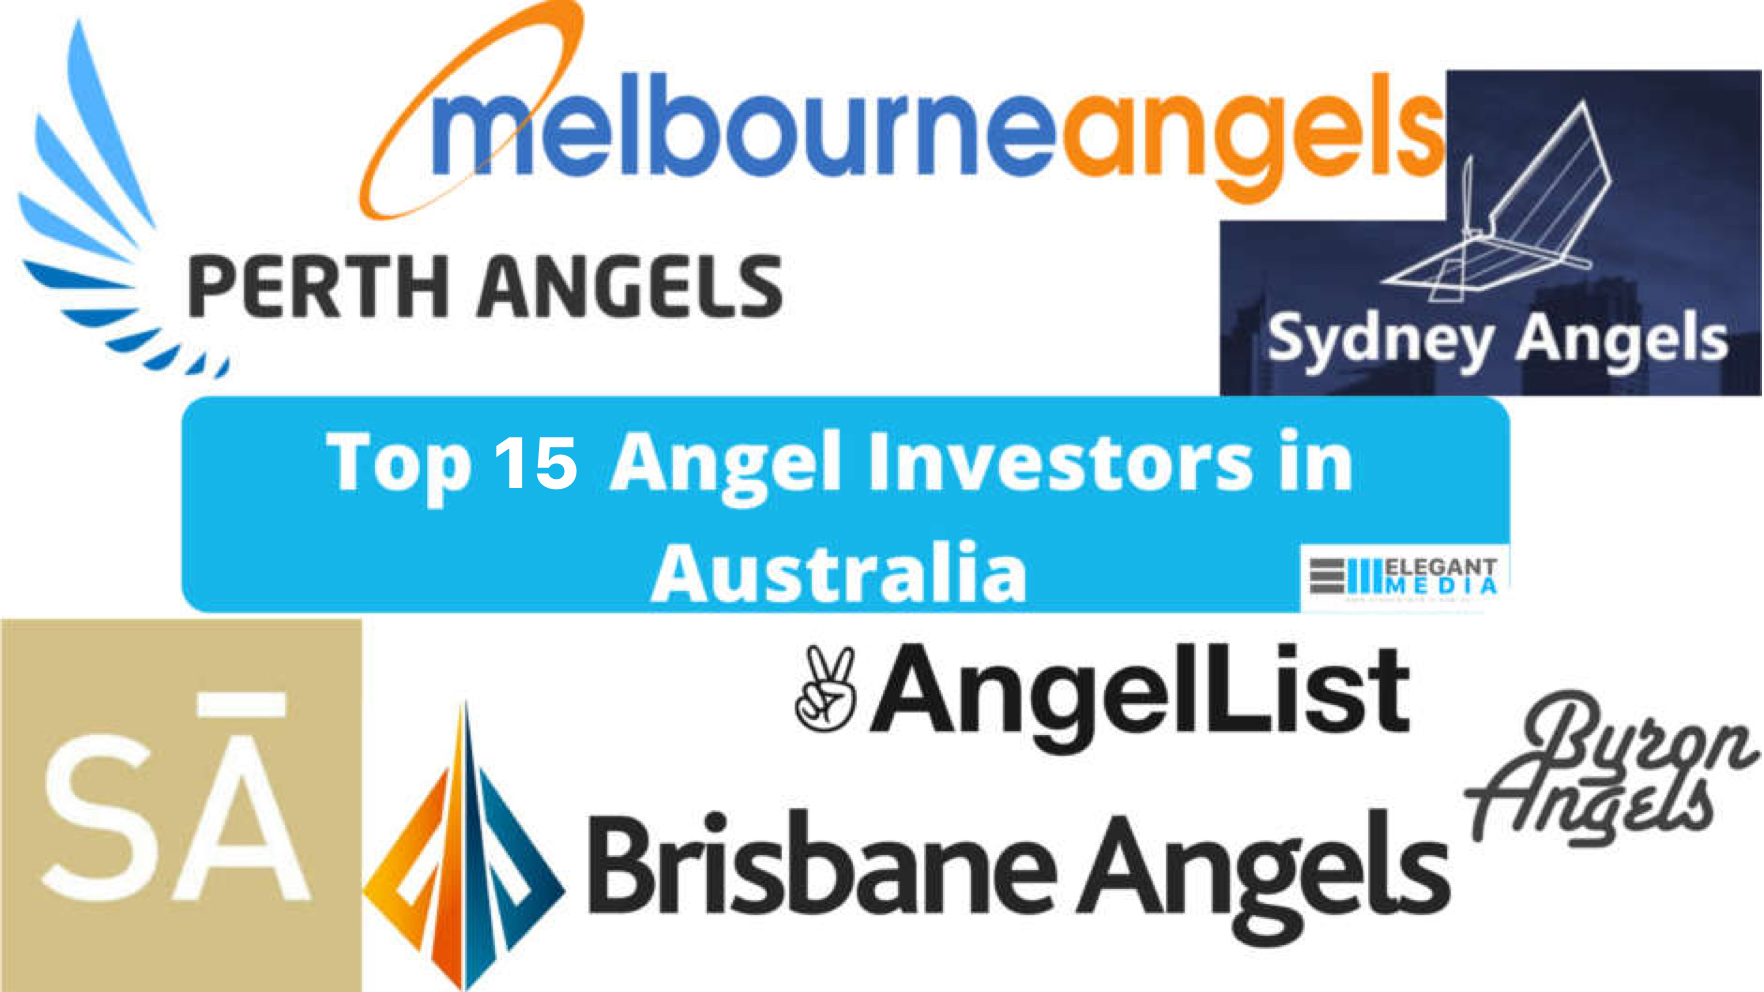 Top Angel Investors image with text